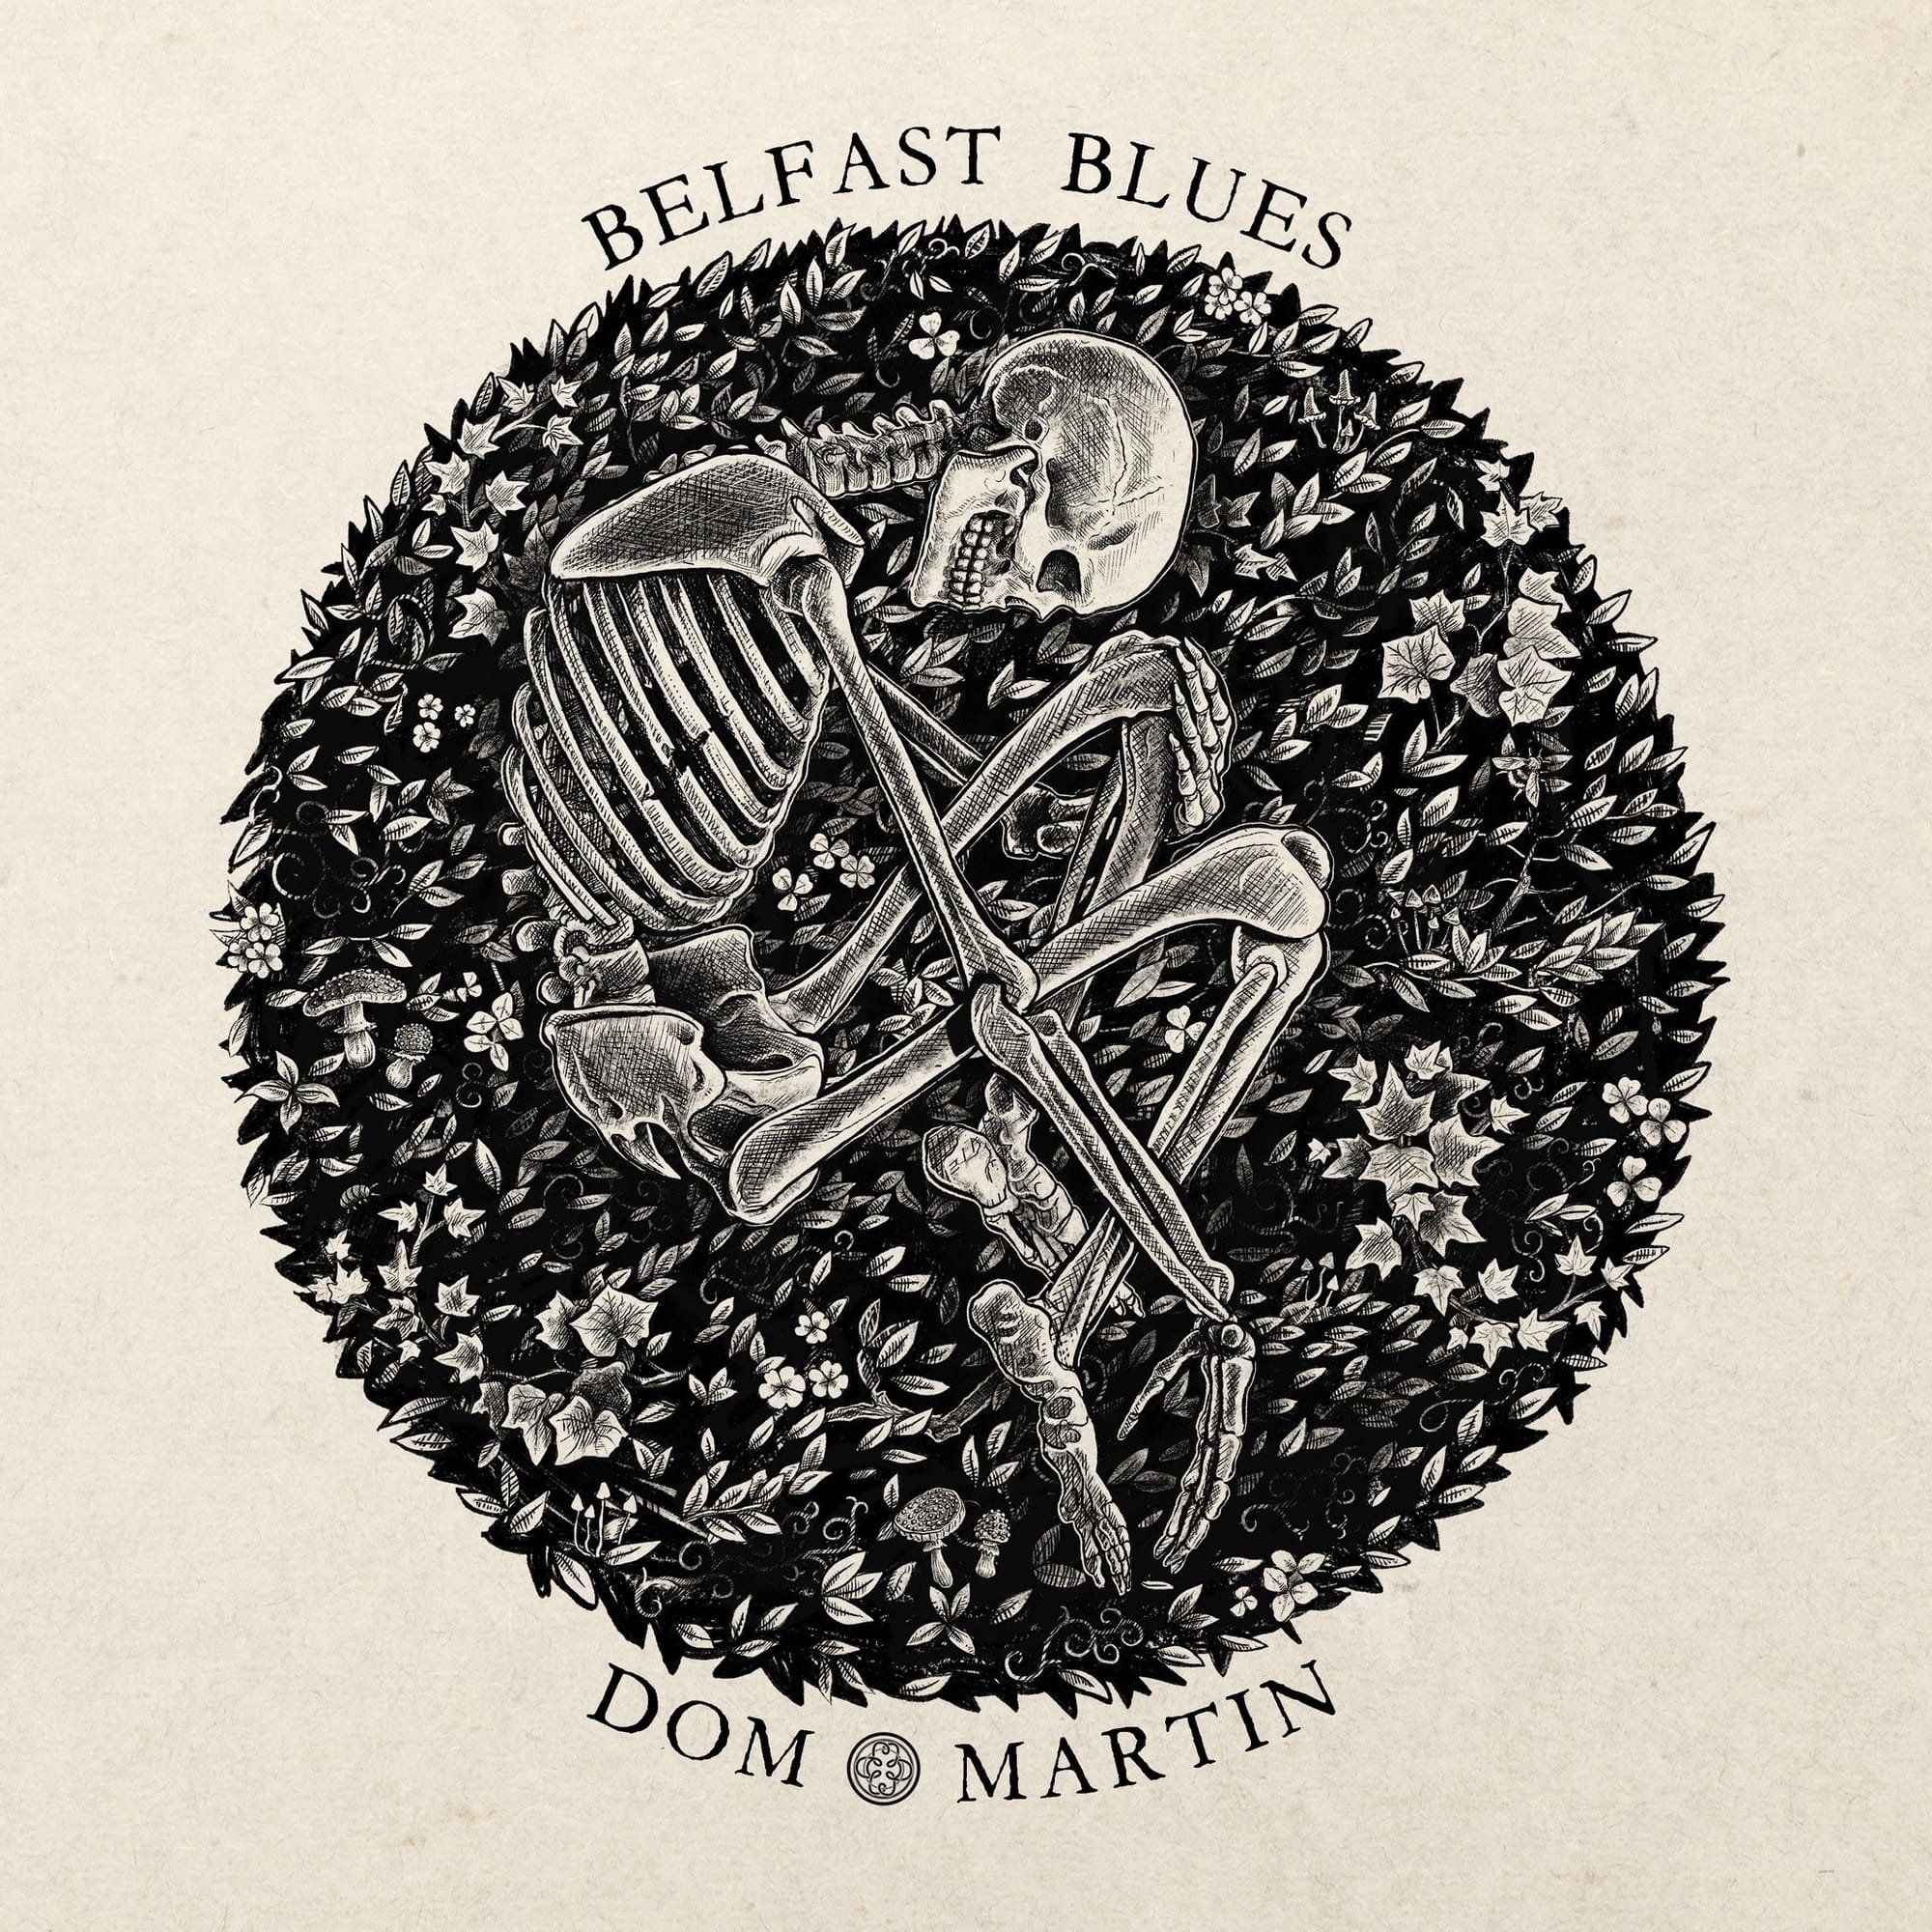 Dom Martin releases new single 'Belfast Blues' ahead of highly anticipated album 'Buried In The Hail